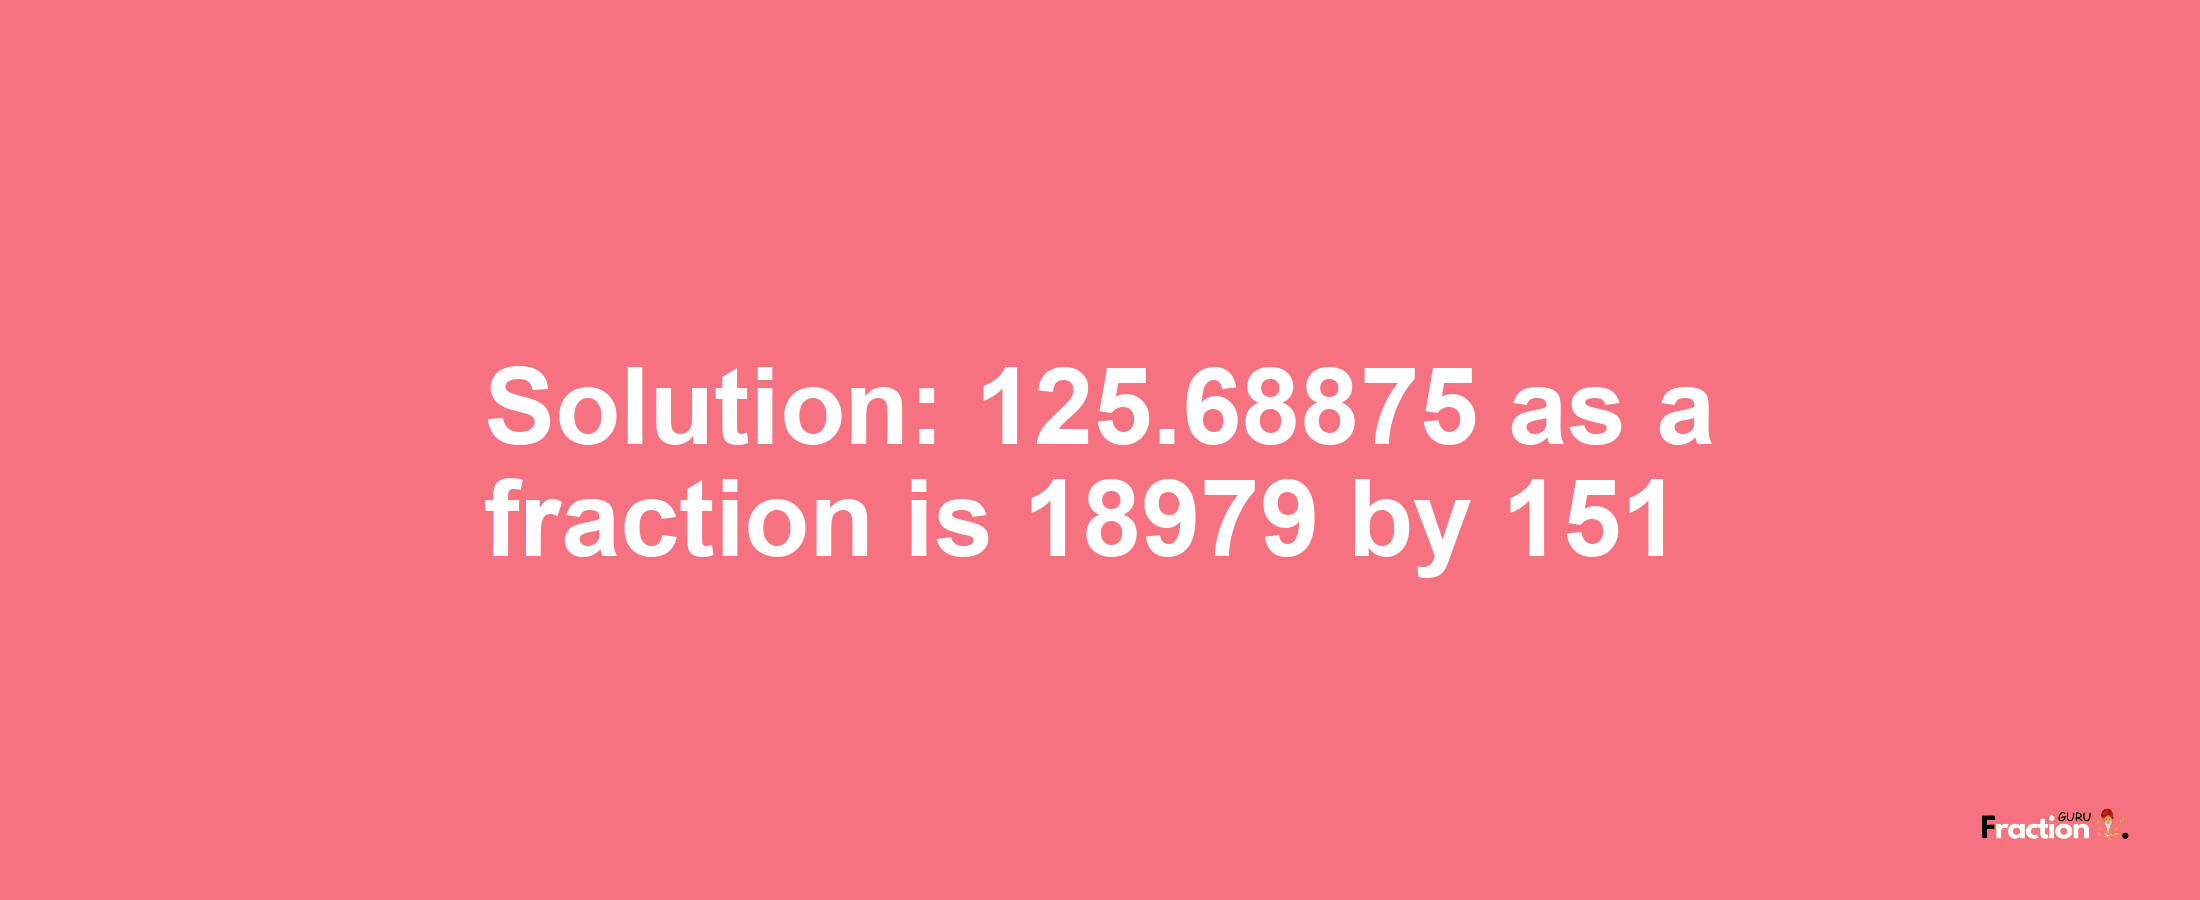 Solution:125.68875 as a fraction is 18979/151